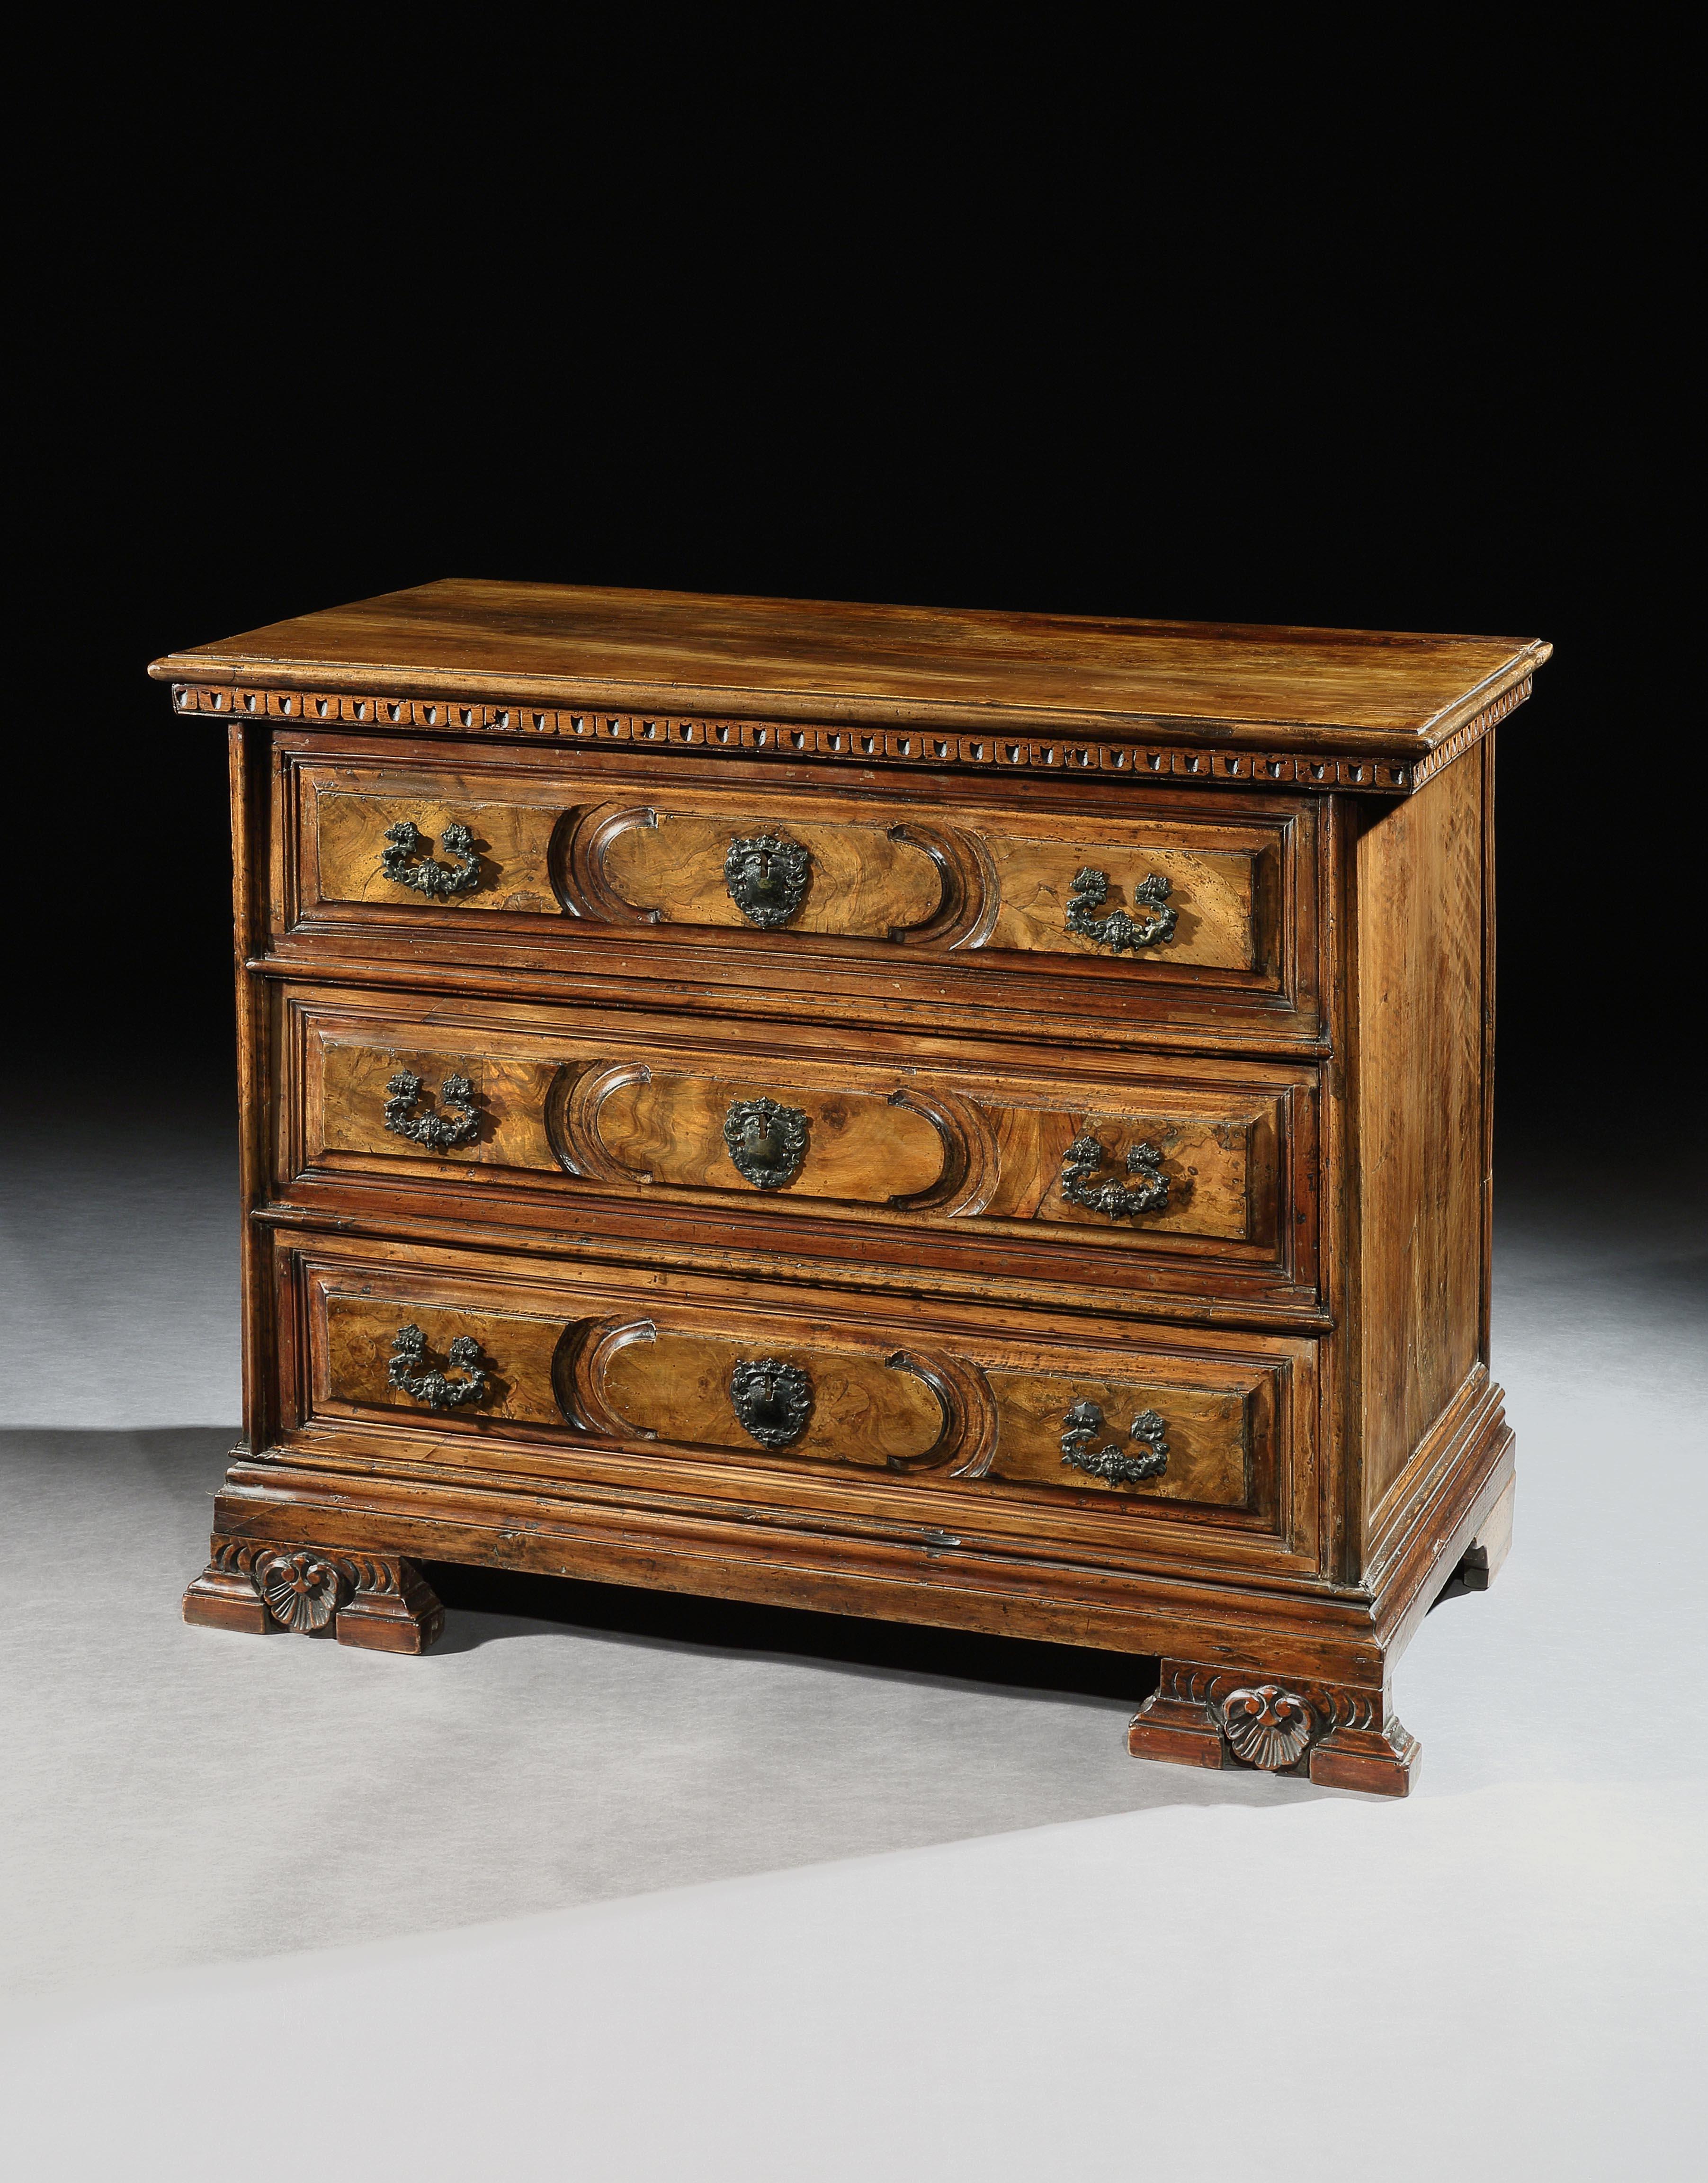 This Classic 18th century model is a rare, small size with a rich color and lustrous patina. From a private collection, Semenzato, Venezia.

Single plank top with solid moulded edge. The frieze with a band of gadrooned carving at the top. Below